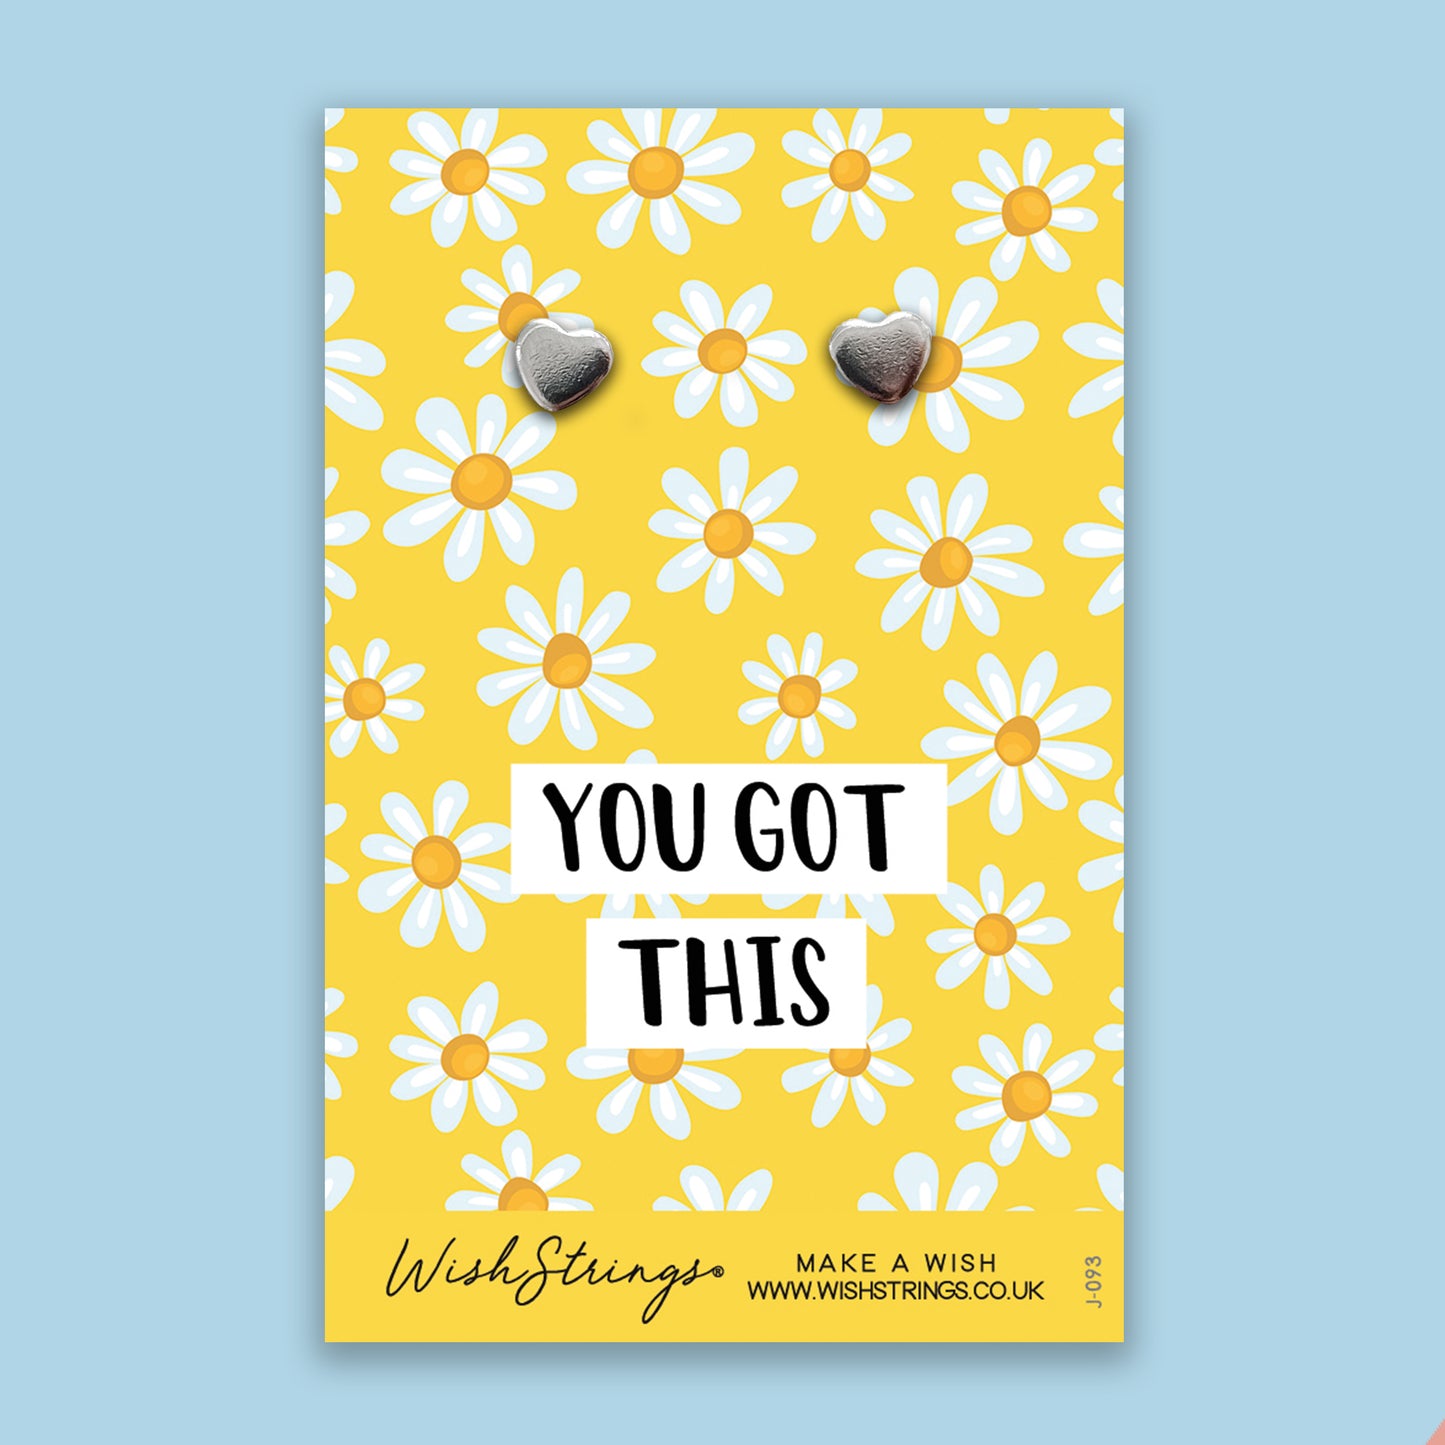 You Got This - Silver Heart Stud Earrings | 304 Stainless - Hypoallergenic